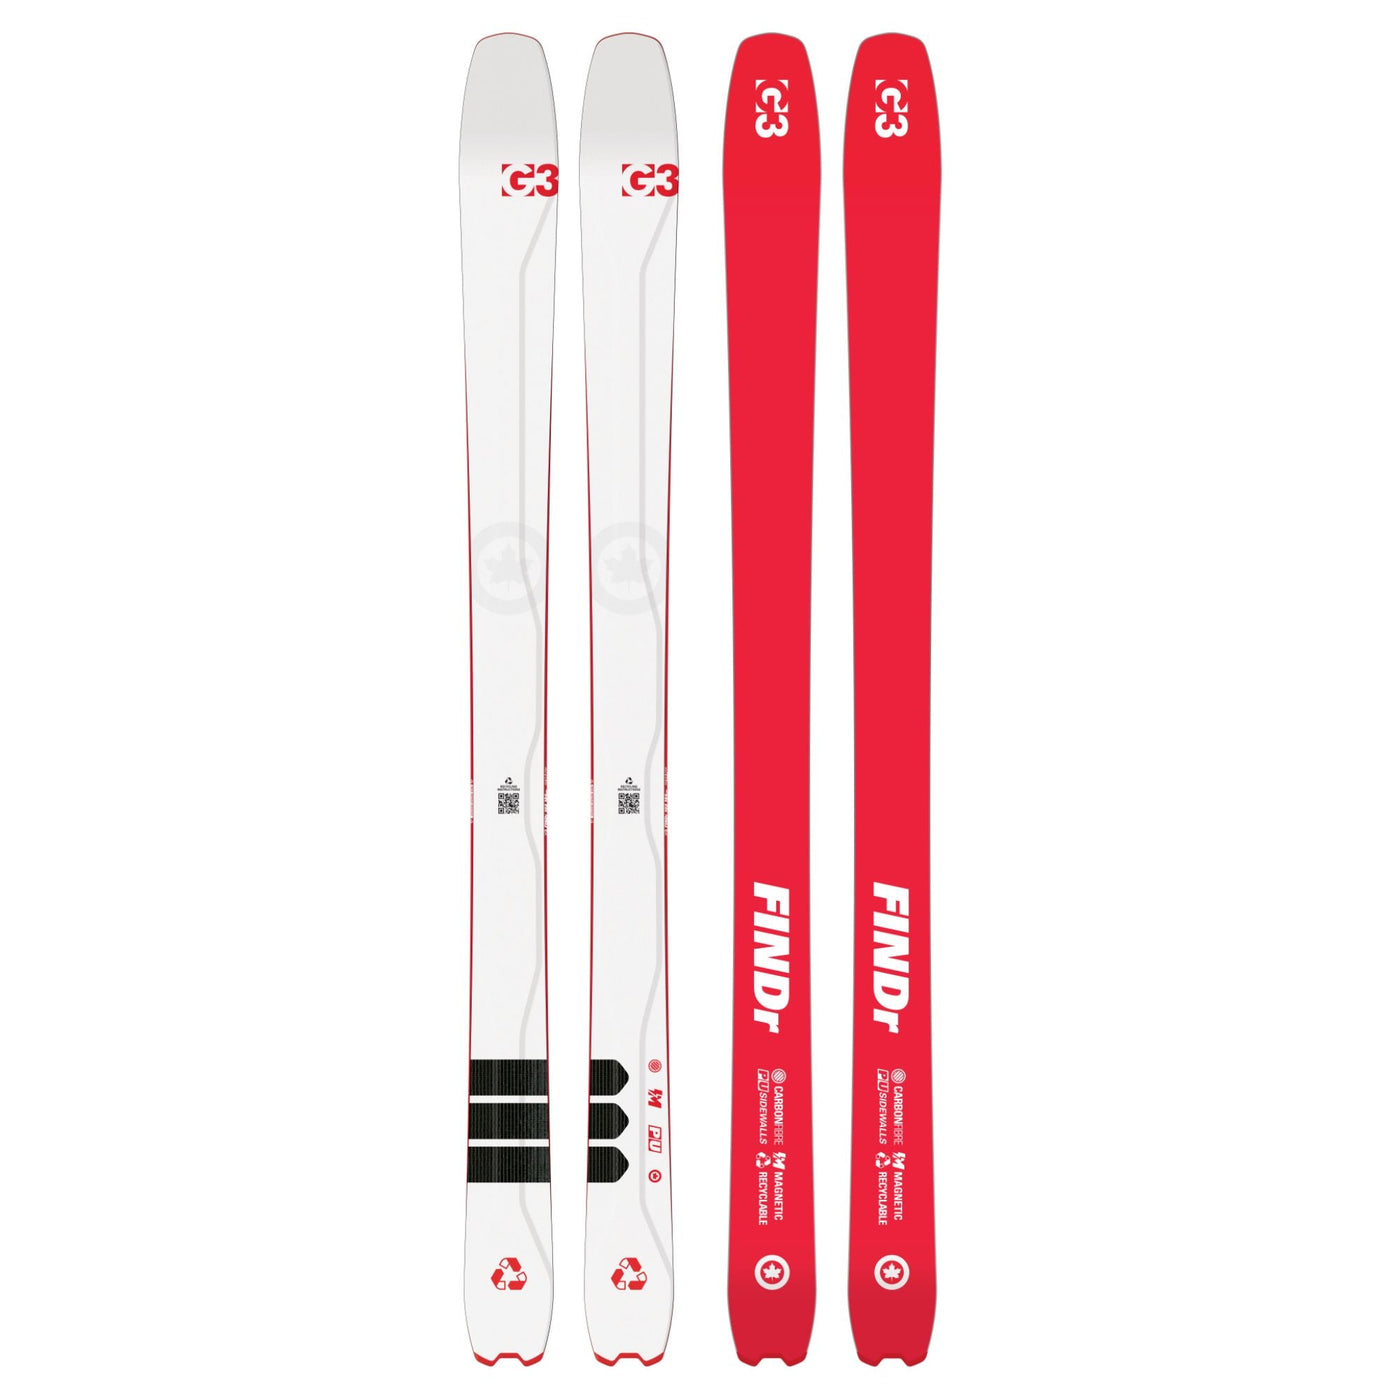 findr r3 102 skis studio product photo